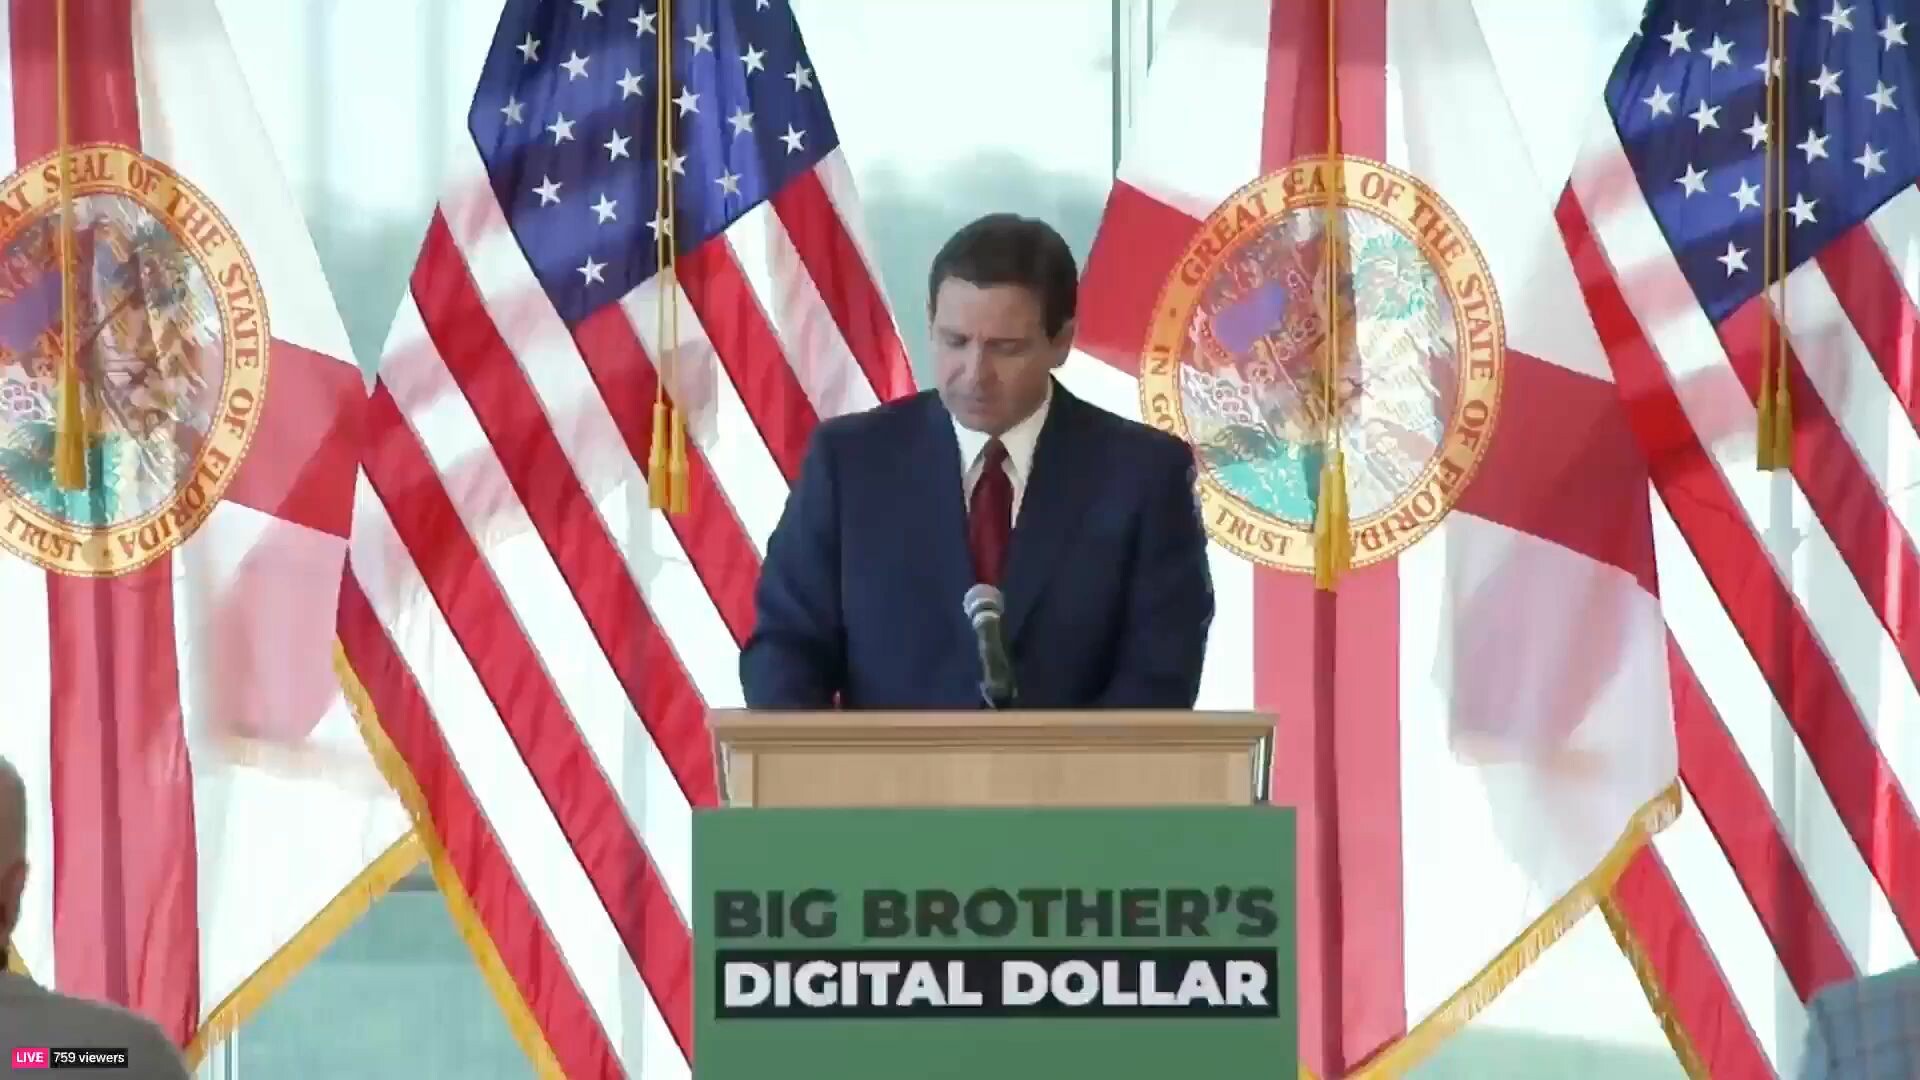 Ron DeSantis holds a press conference on “Big Brother’s Digital Dollar” – Proposes Bill to Ban CBDCs